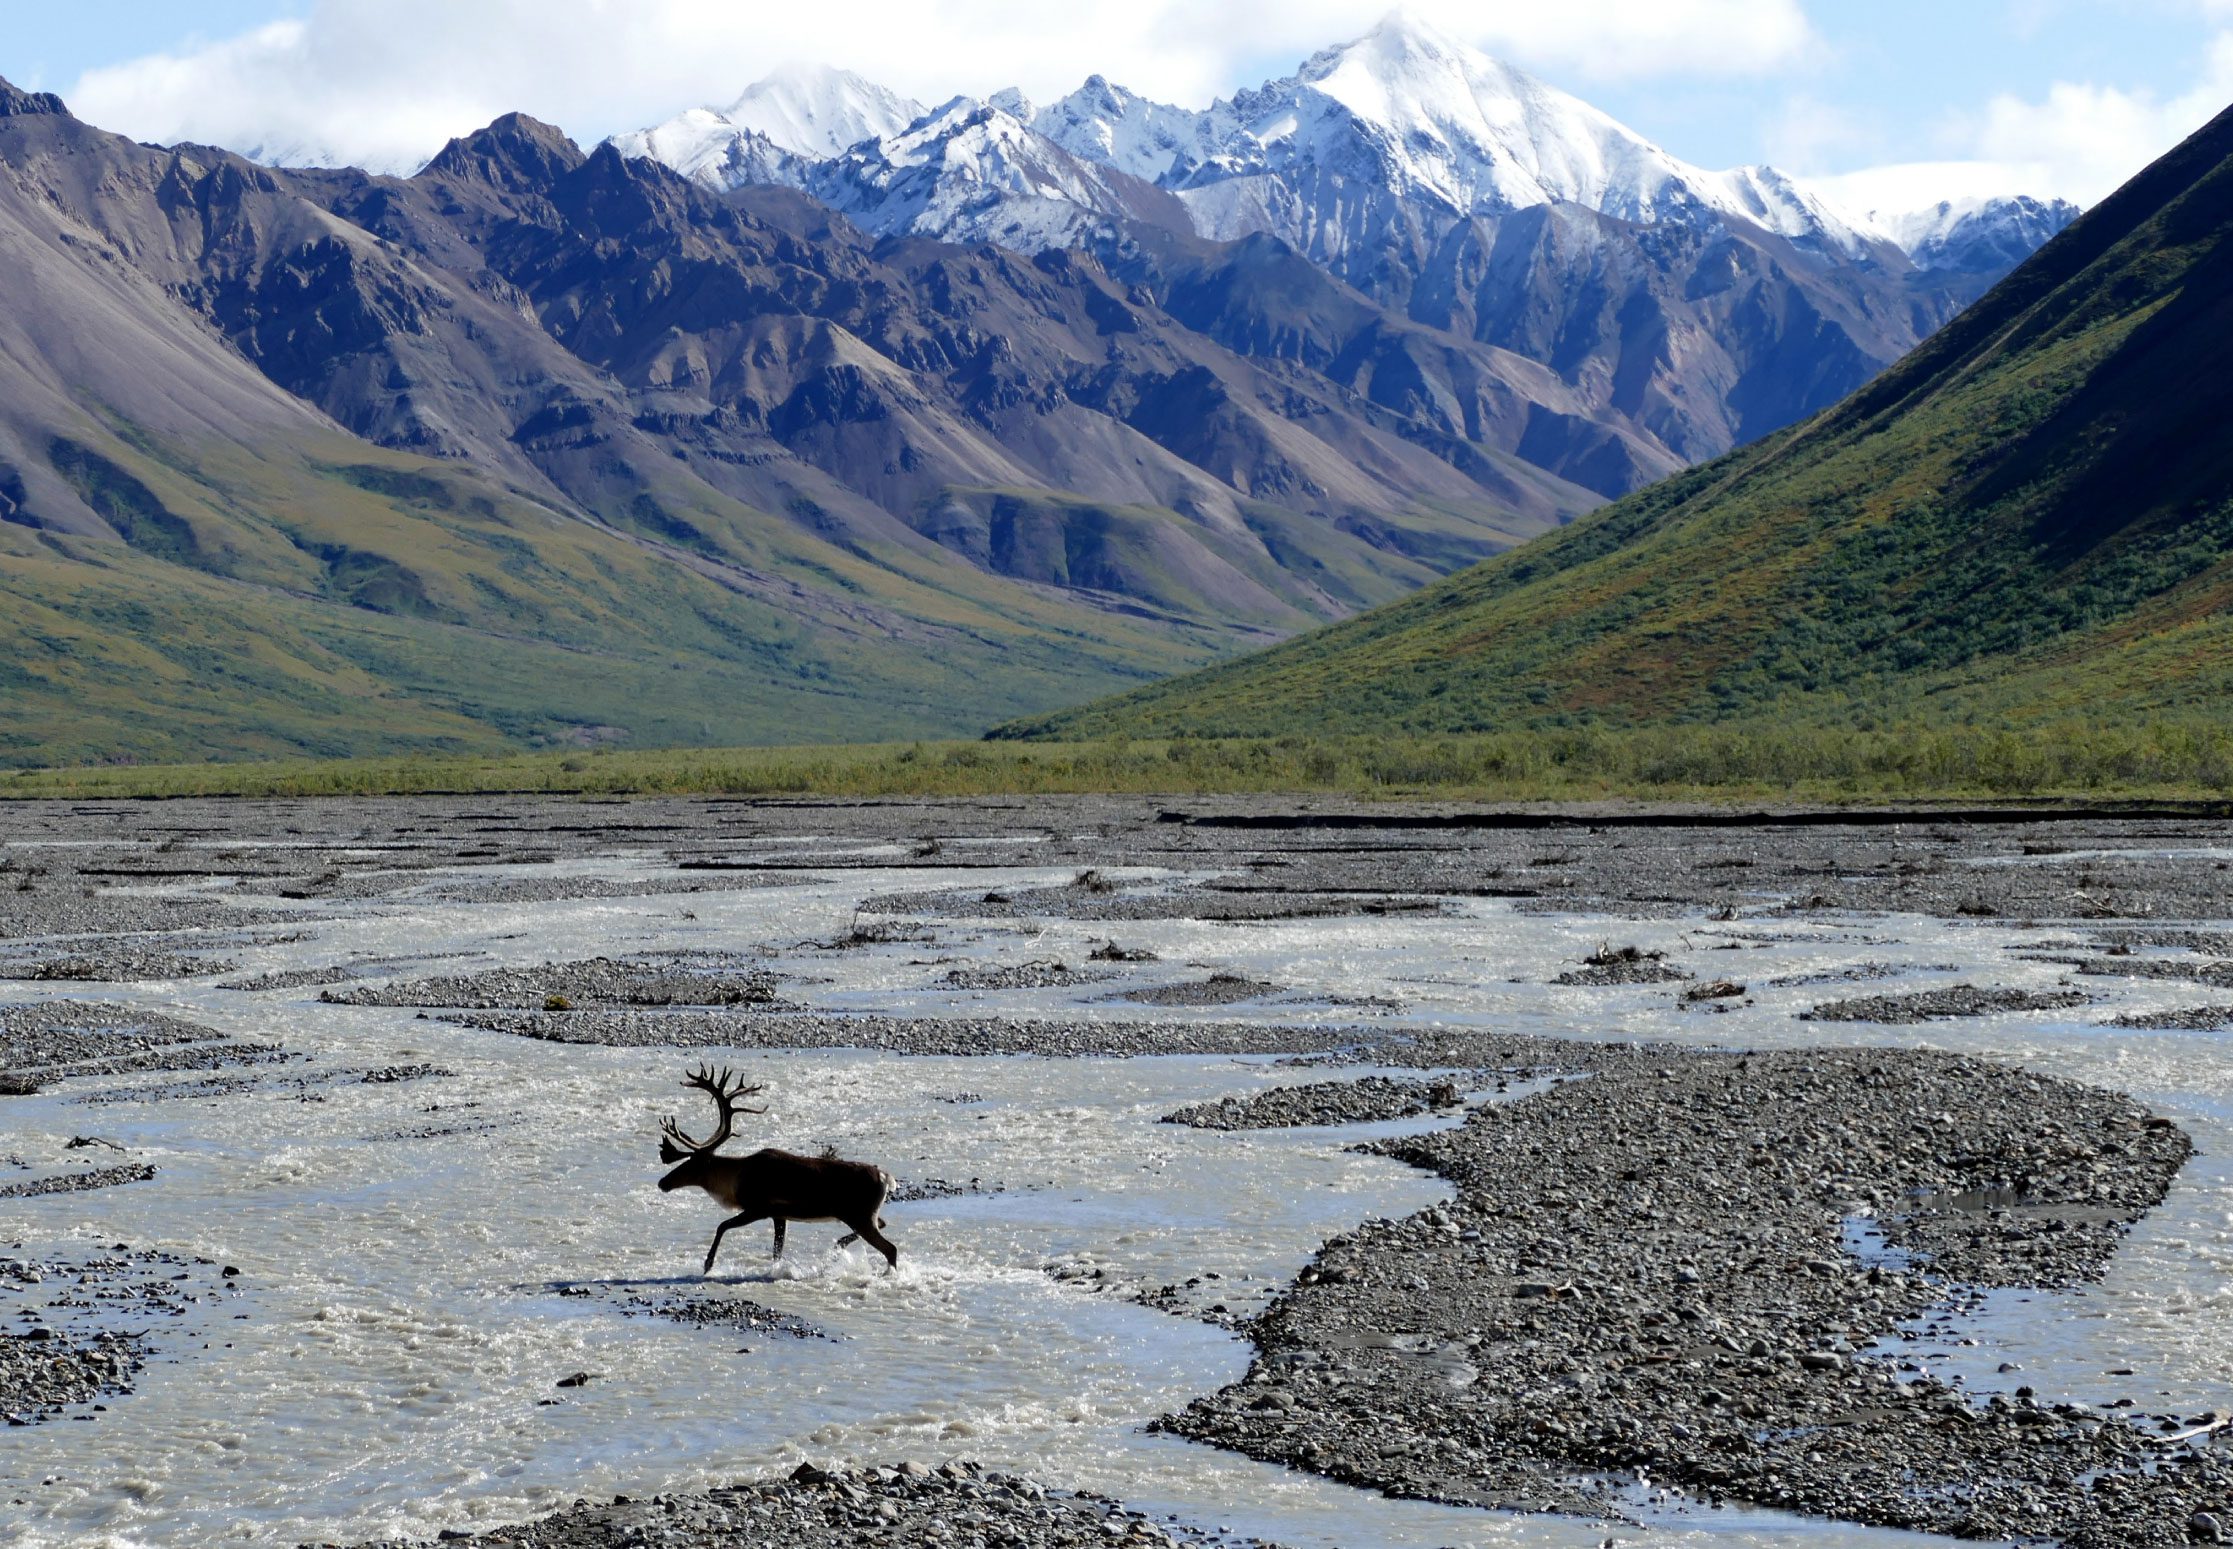 A caribou crosses a riverbed - an image seen on the Alaska Experience